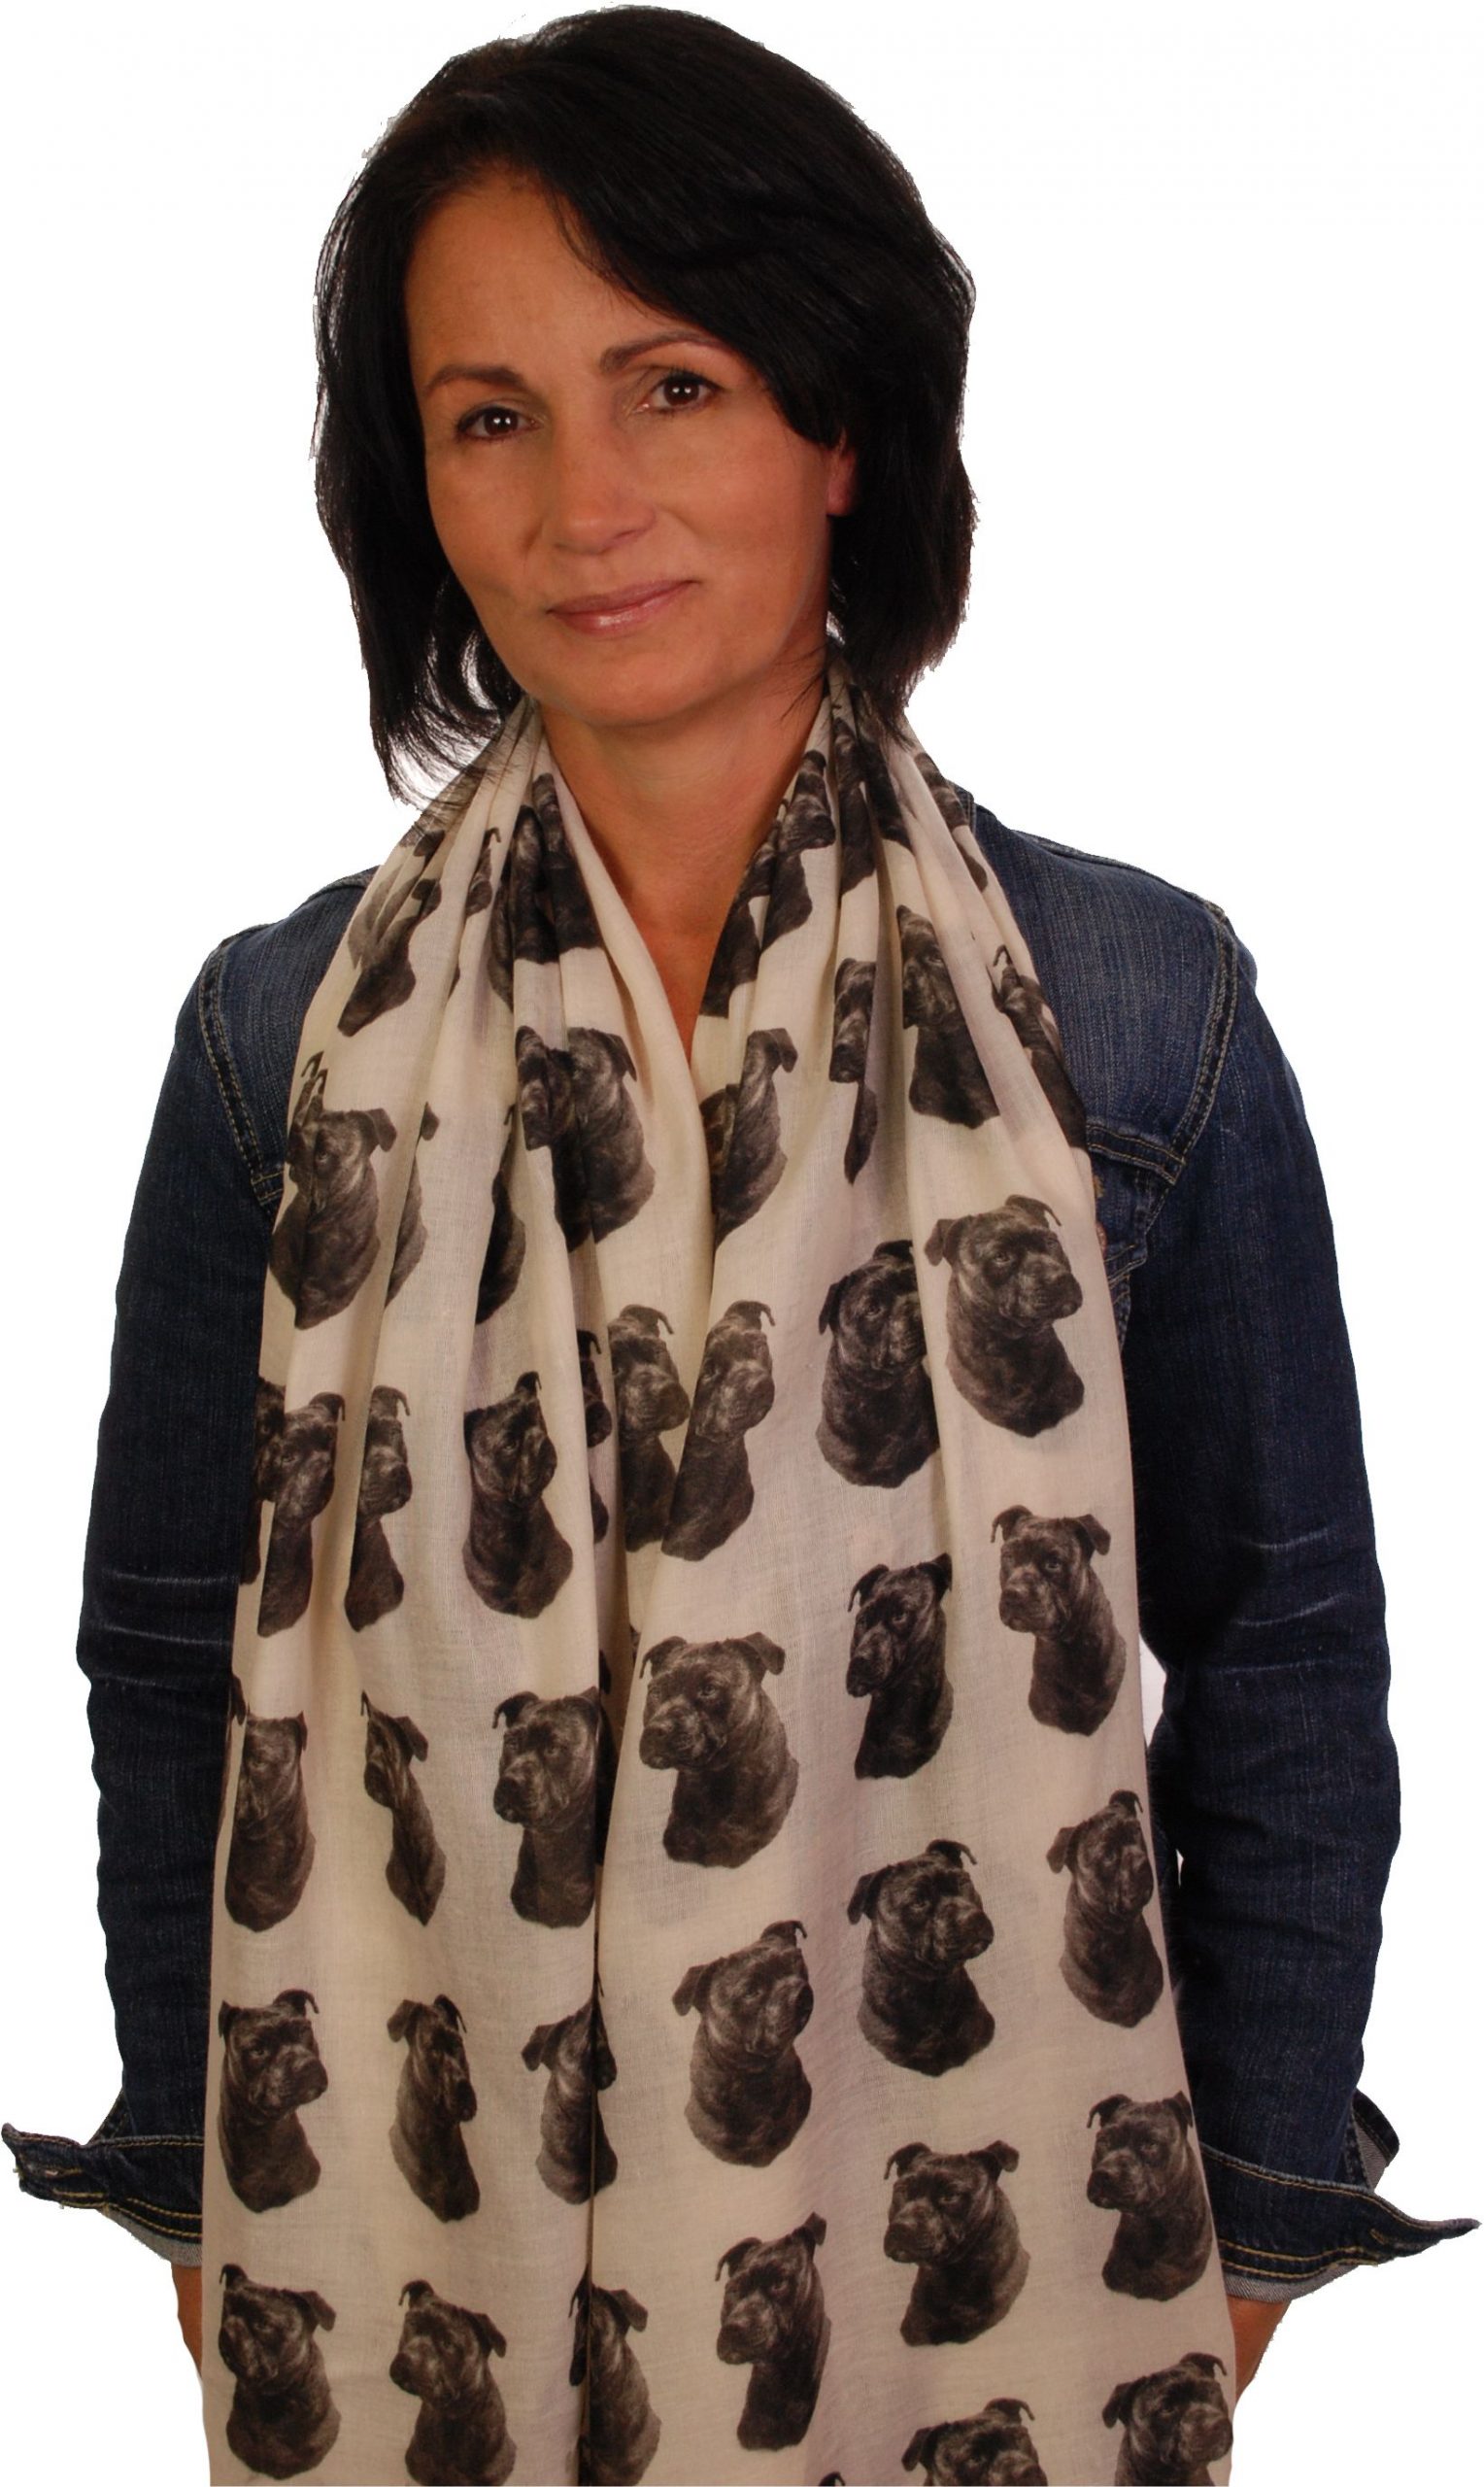 Mike Sibley Staffordshire Bull Terrier licensed design ladies fashion scarf